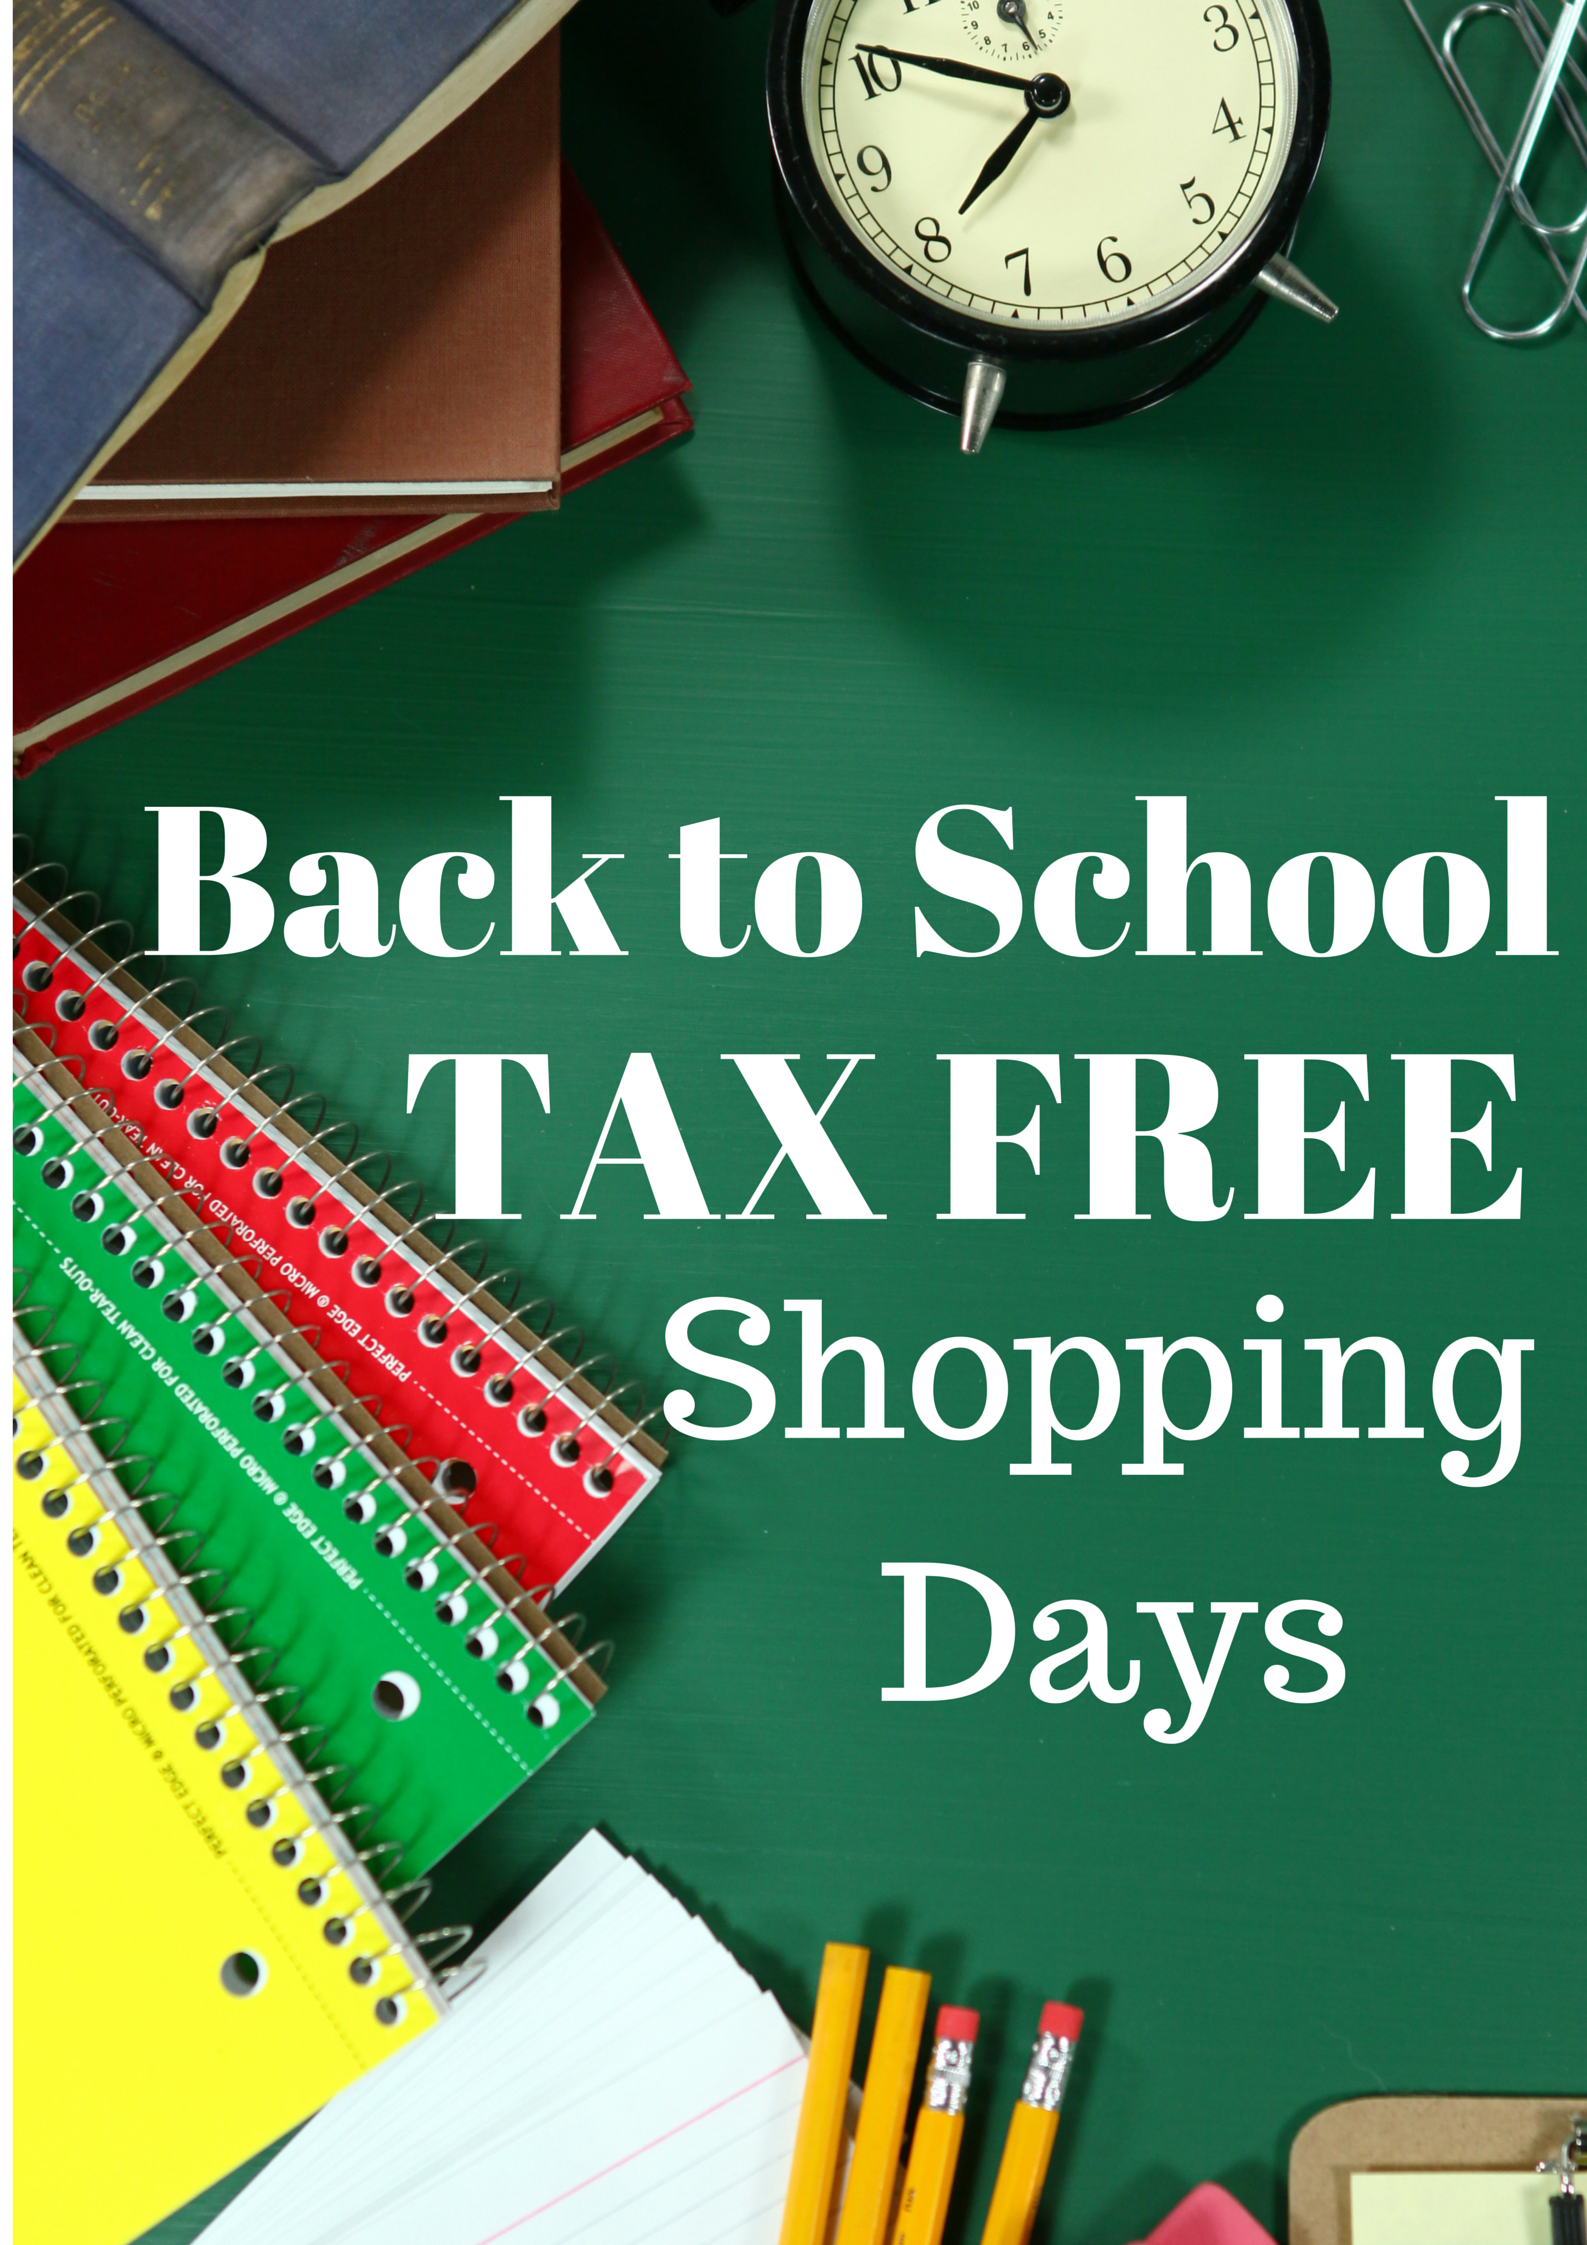 back-to-school-tax-free-shopping-dates-by-state